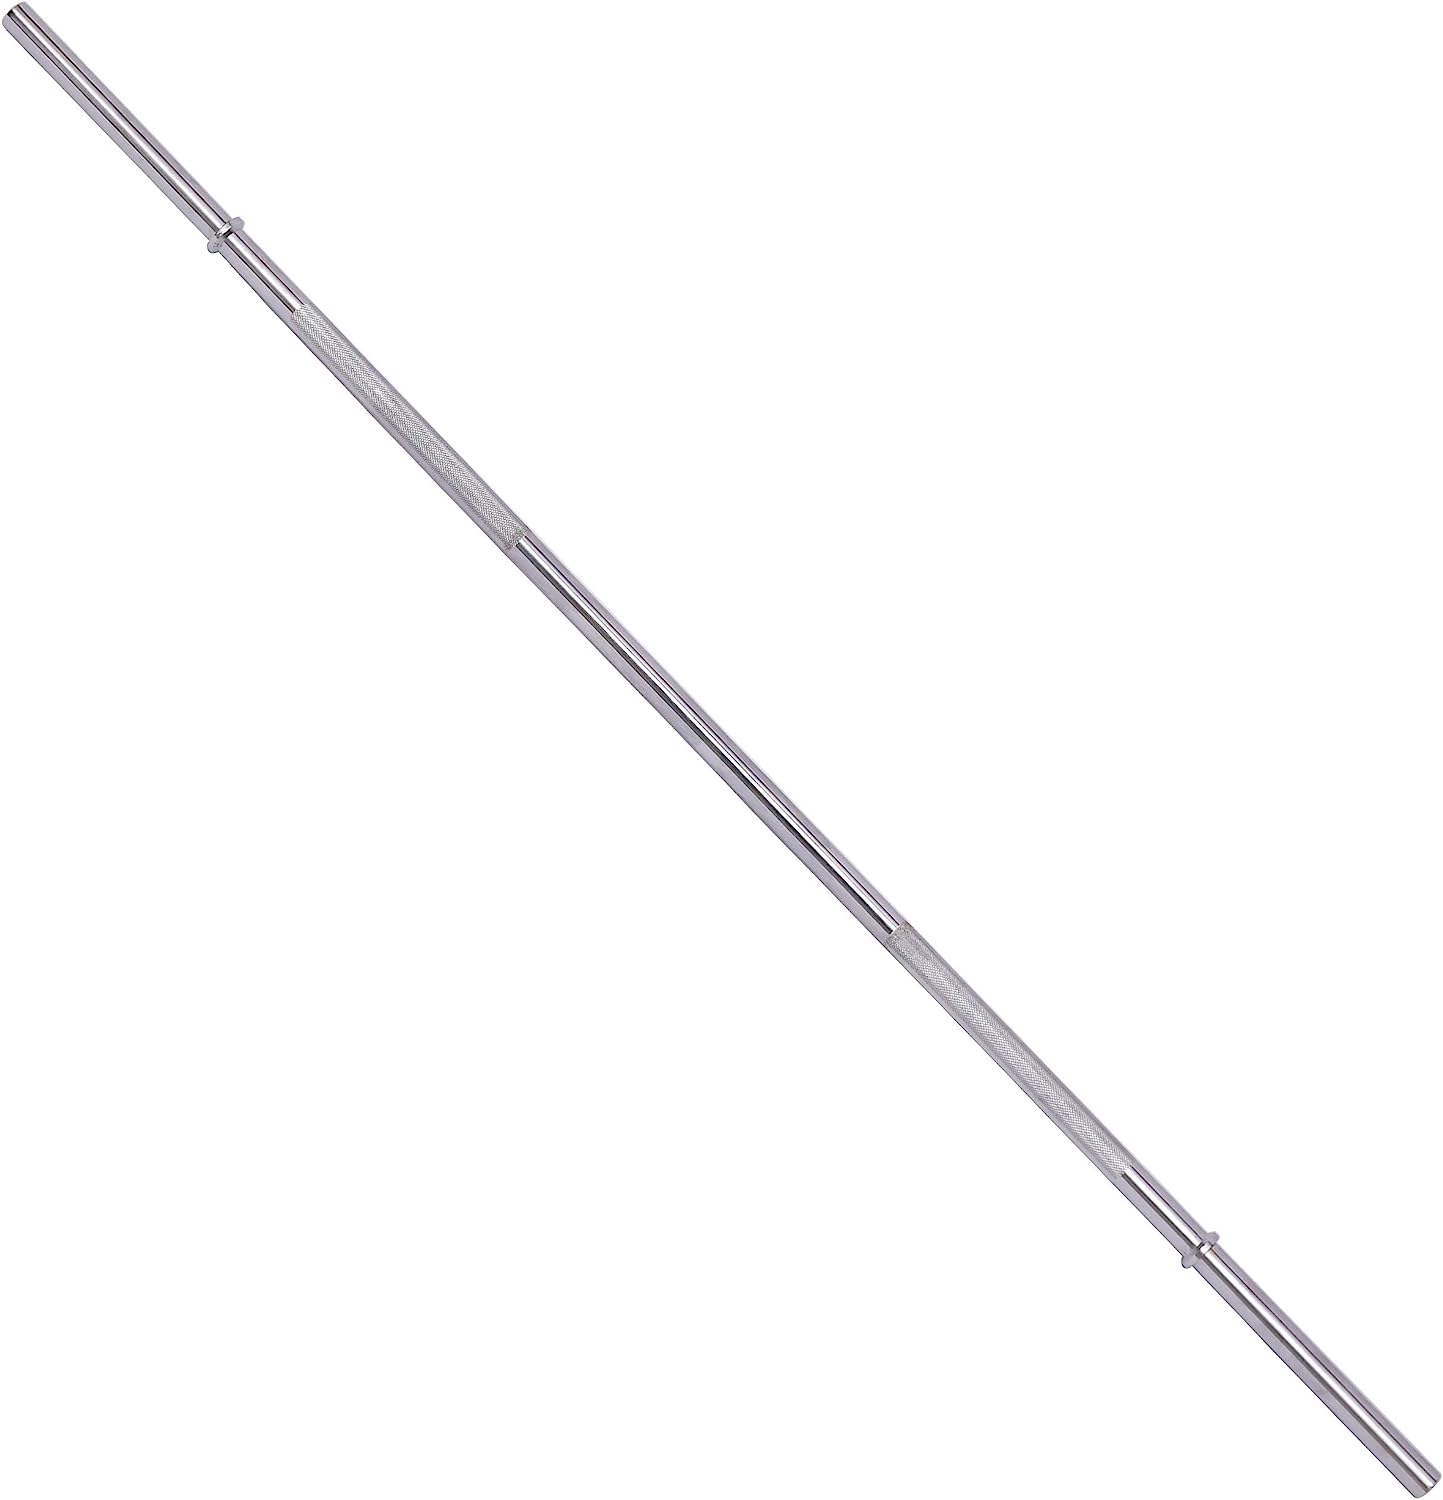 Sporzon! Olympic Barbell Standard Weightlifting Barbell, 1-inch, 5FT, Chrome - $30